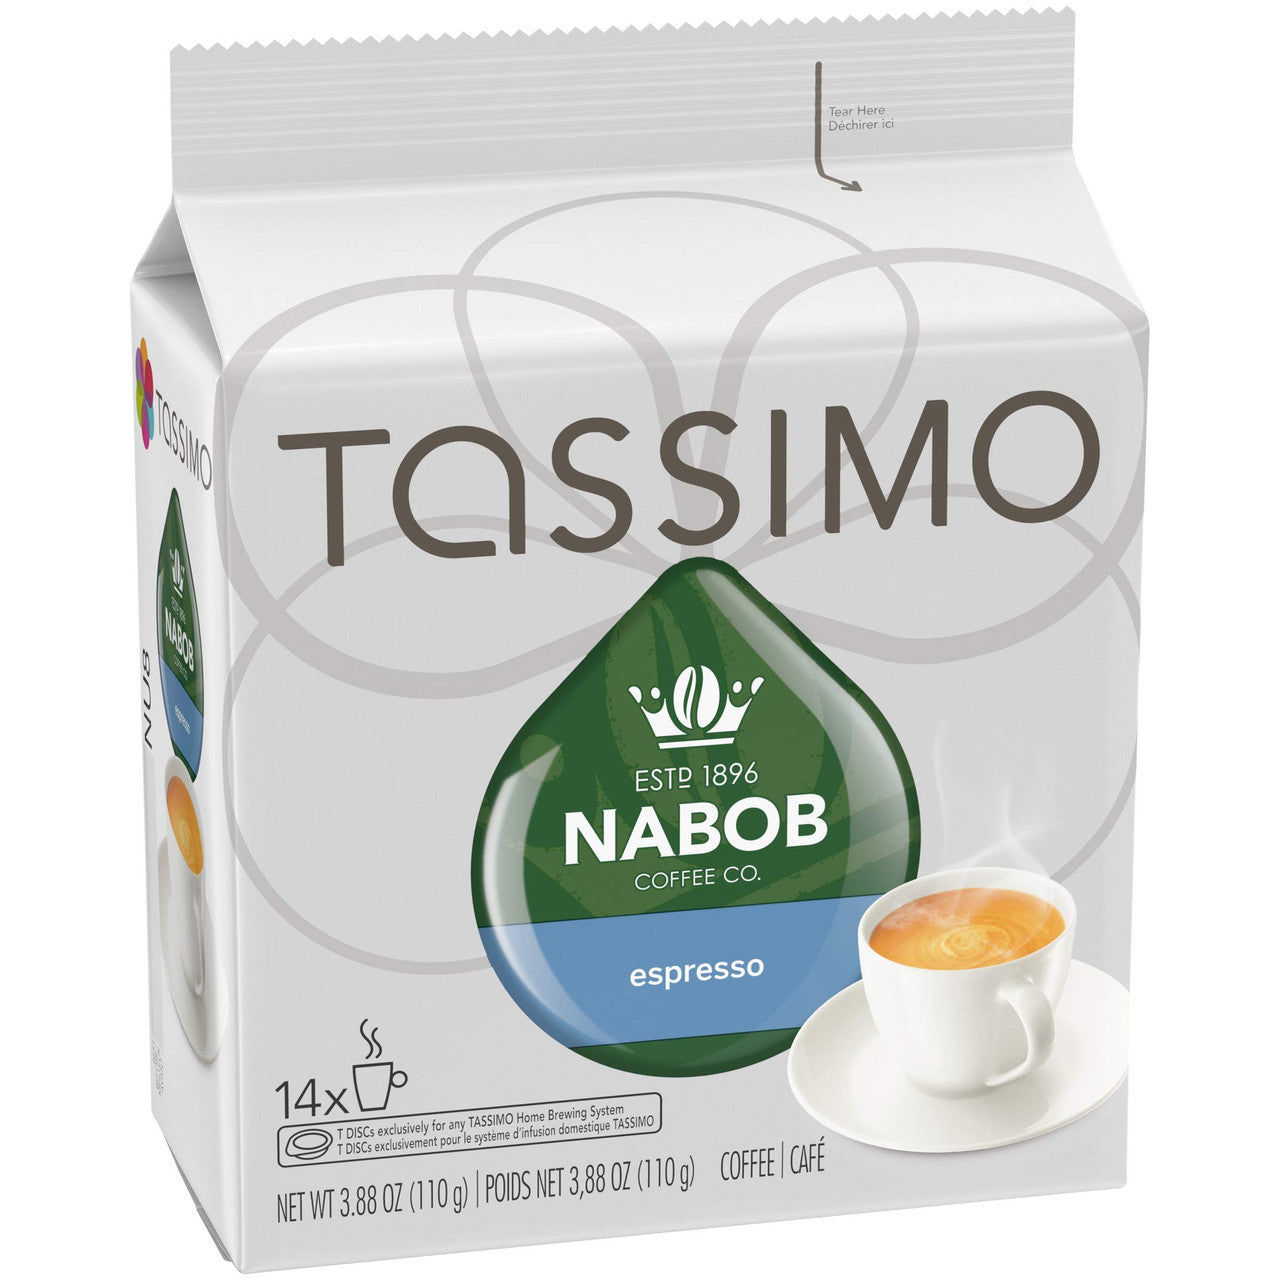 Tassimo Nabob Coffee Espresso, 70 T-Discs (5 Boxes of 14 T-Discs) {Imported from Canada}